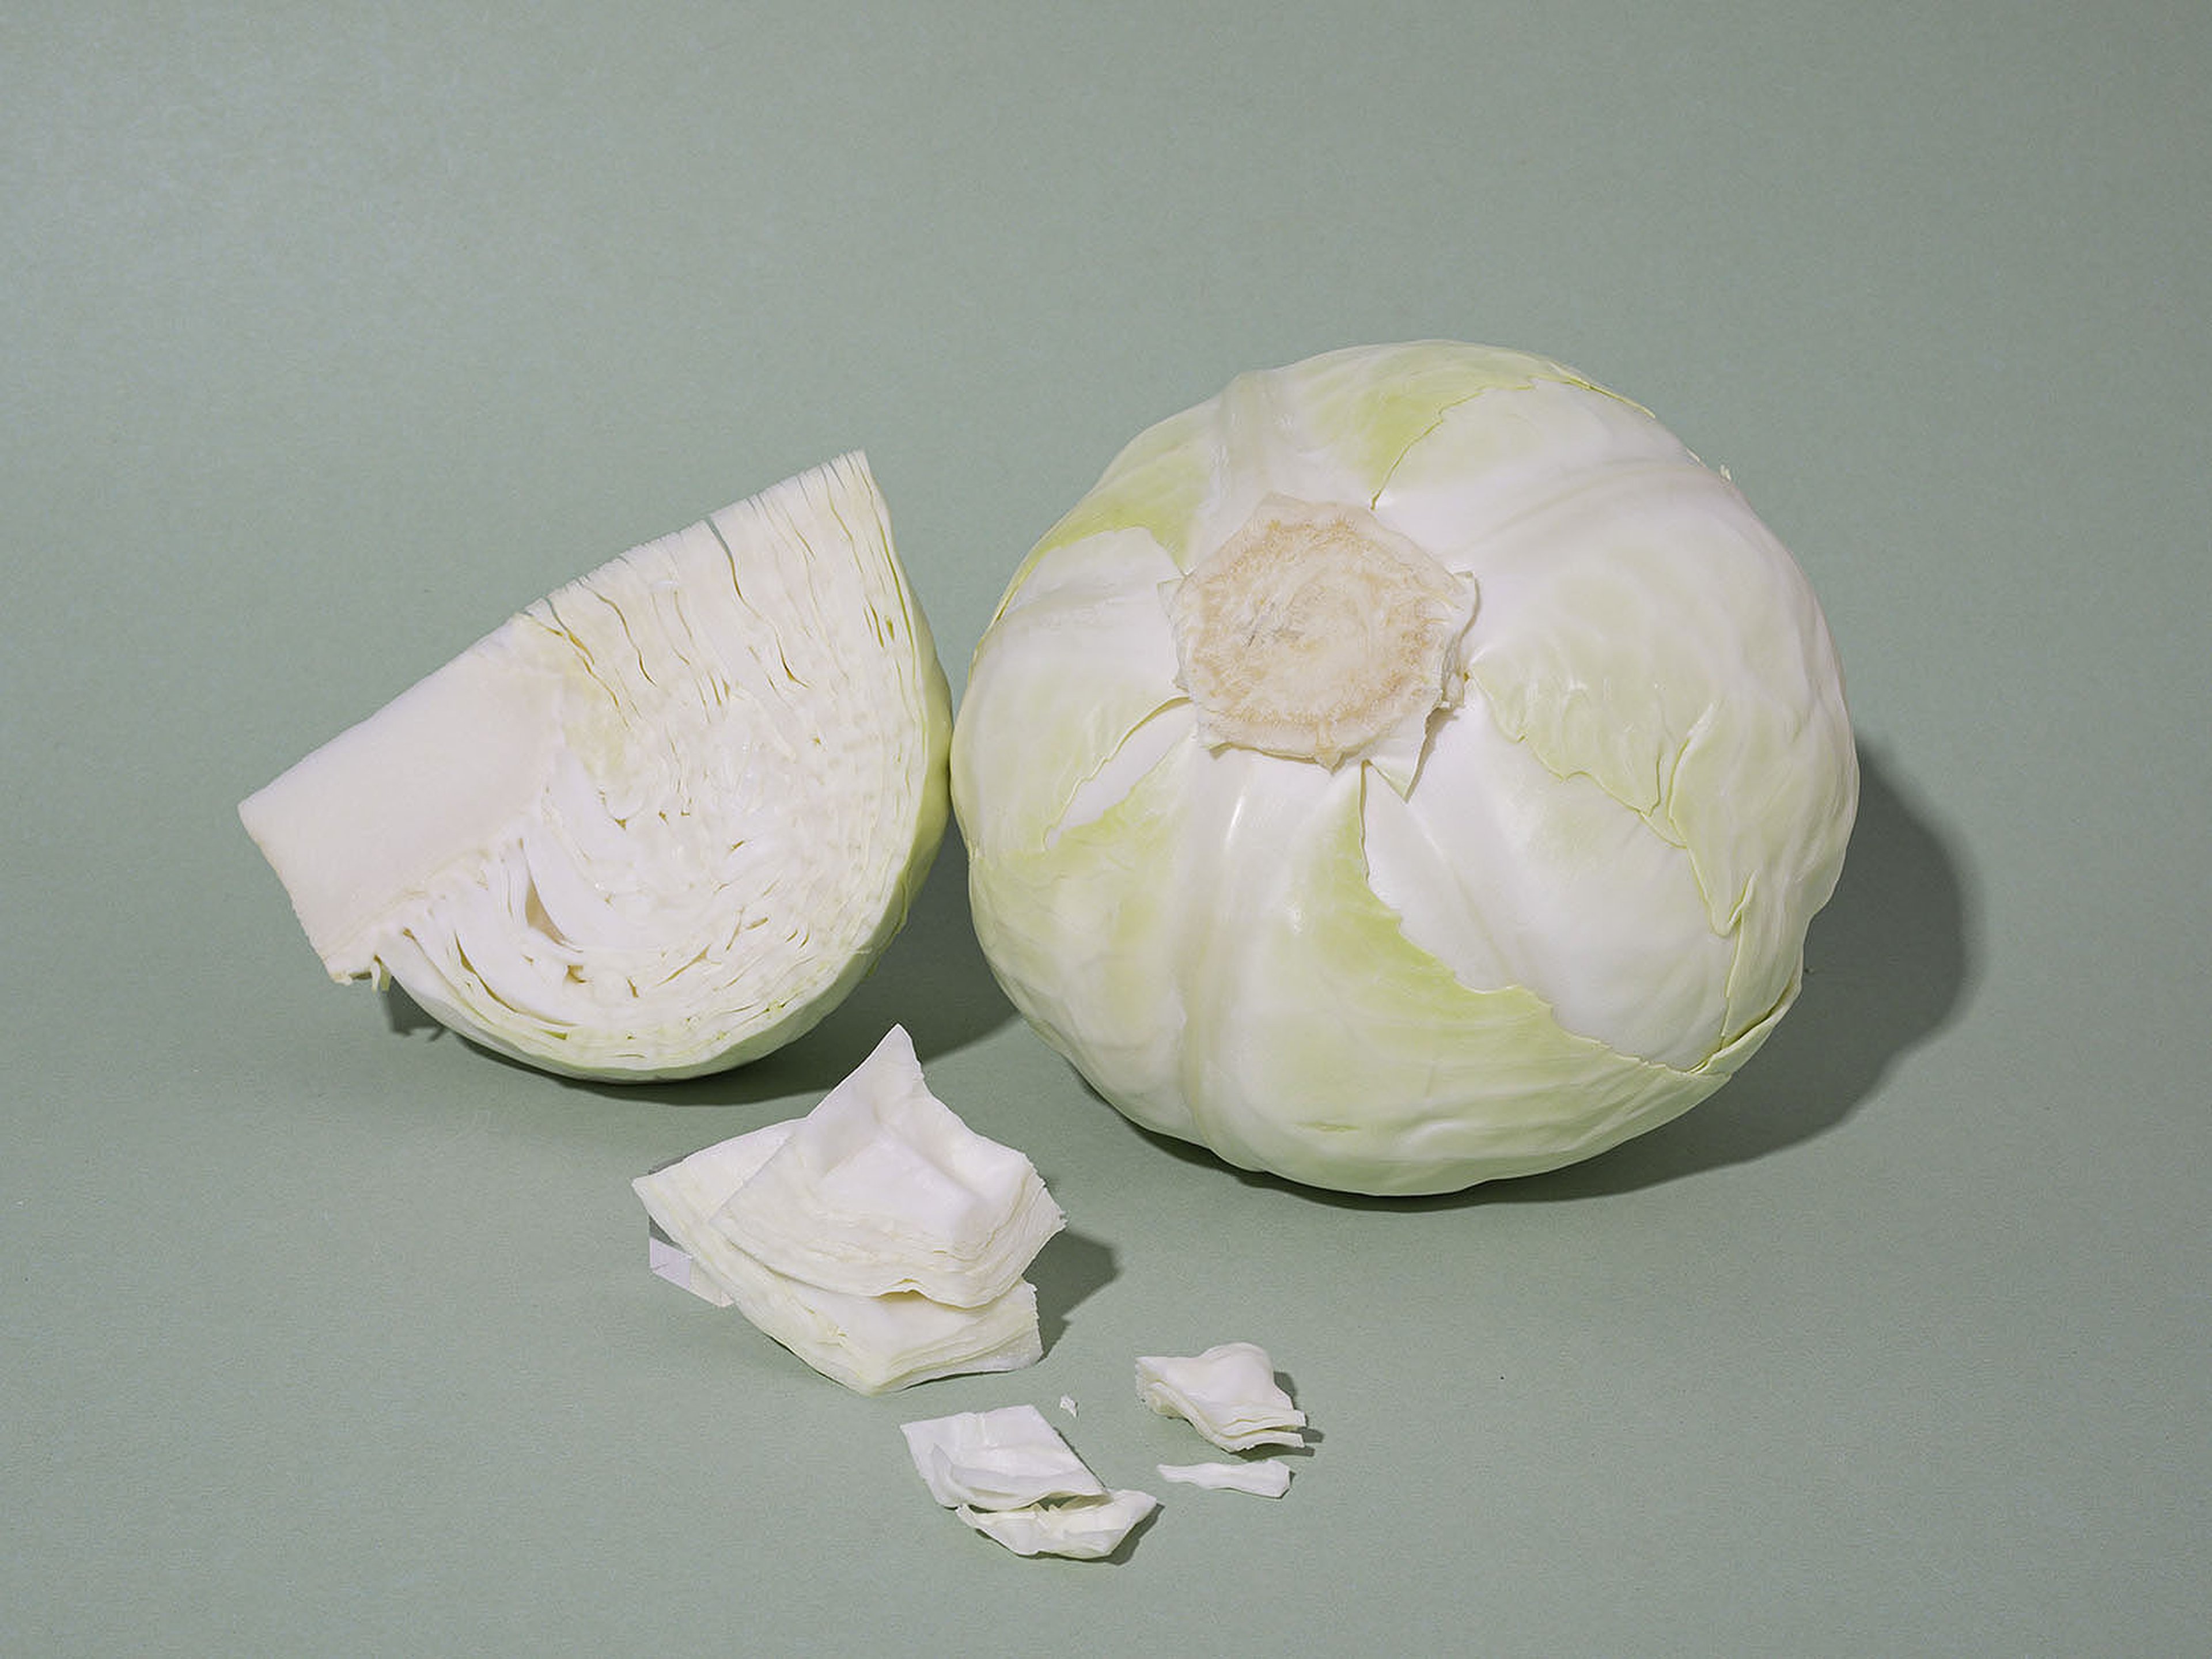 Everything You Need to Know About Preparing and Storing In Season White Cabbage